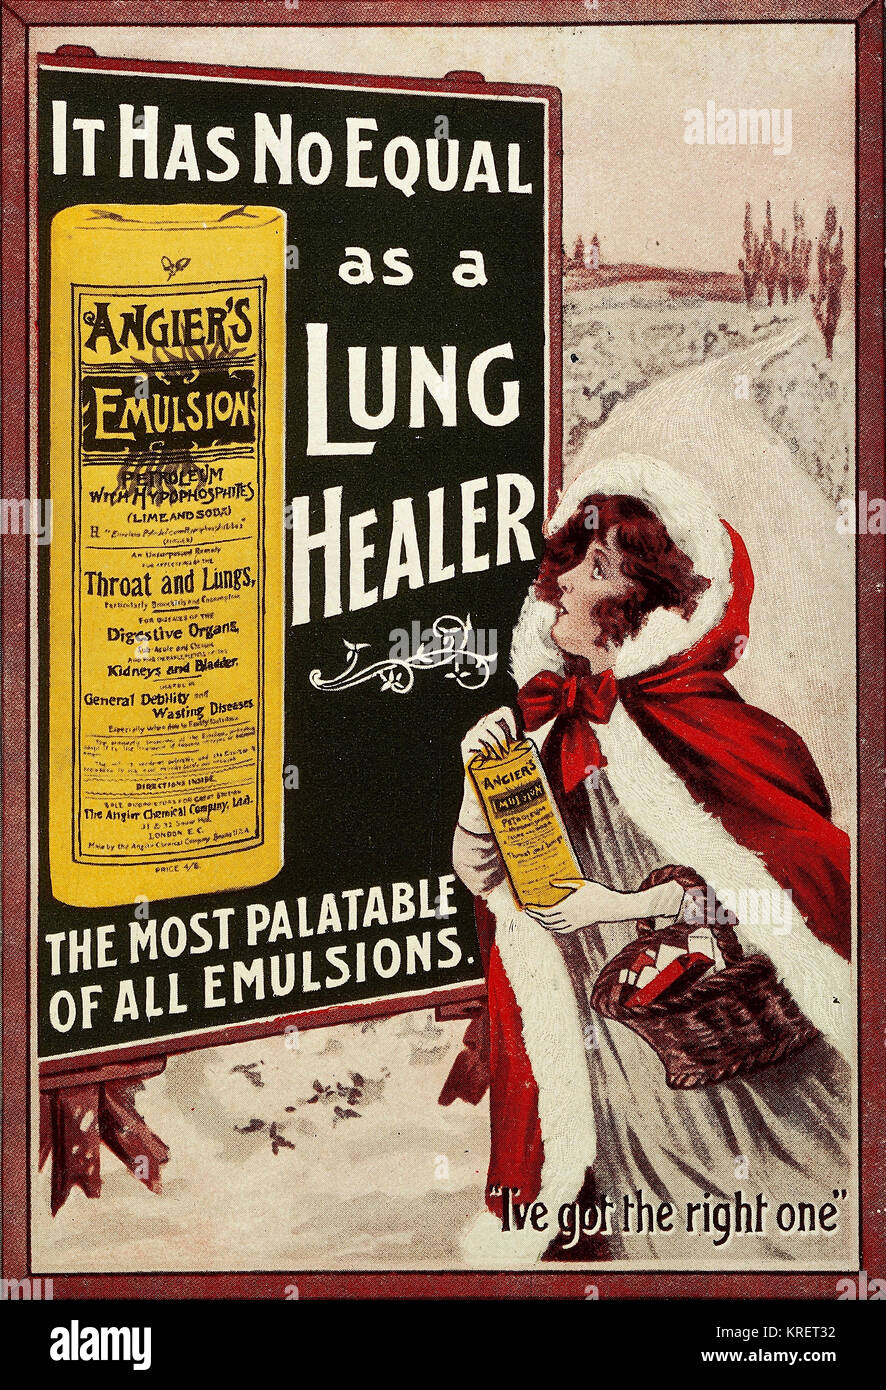 L0031713 Angier's Emulsion, Lung Healer: Lady in the snow Credit: Wellcome Library, London. Wellcome Images images@wellcome.ac.uk http://wellcomeimages.org Ephemera Collection. QV: Advertising: 1850-1920: 1 Angier's emulsion. [Magazine insert]. London: The Angier Chemical Company Ltd., [1907]  A lady in a red, fur-lined cloak, pauses to check a billboard advertising the product 'It has no equal as a Lung Healer; the most palatable of all emulsions'. with the legend; 'I've got the right one'. 1907 Angier's Emulsion heals the lungs, helps digestion / Angier Chemical Co. Published: 1907  Copyrigh Stock Photo